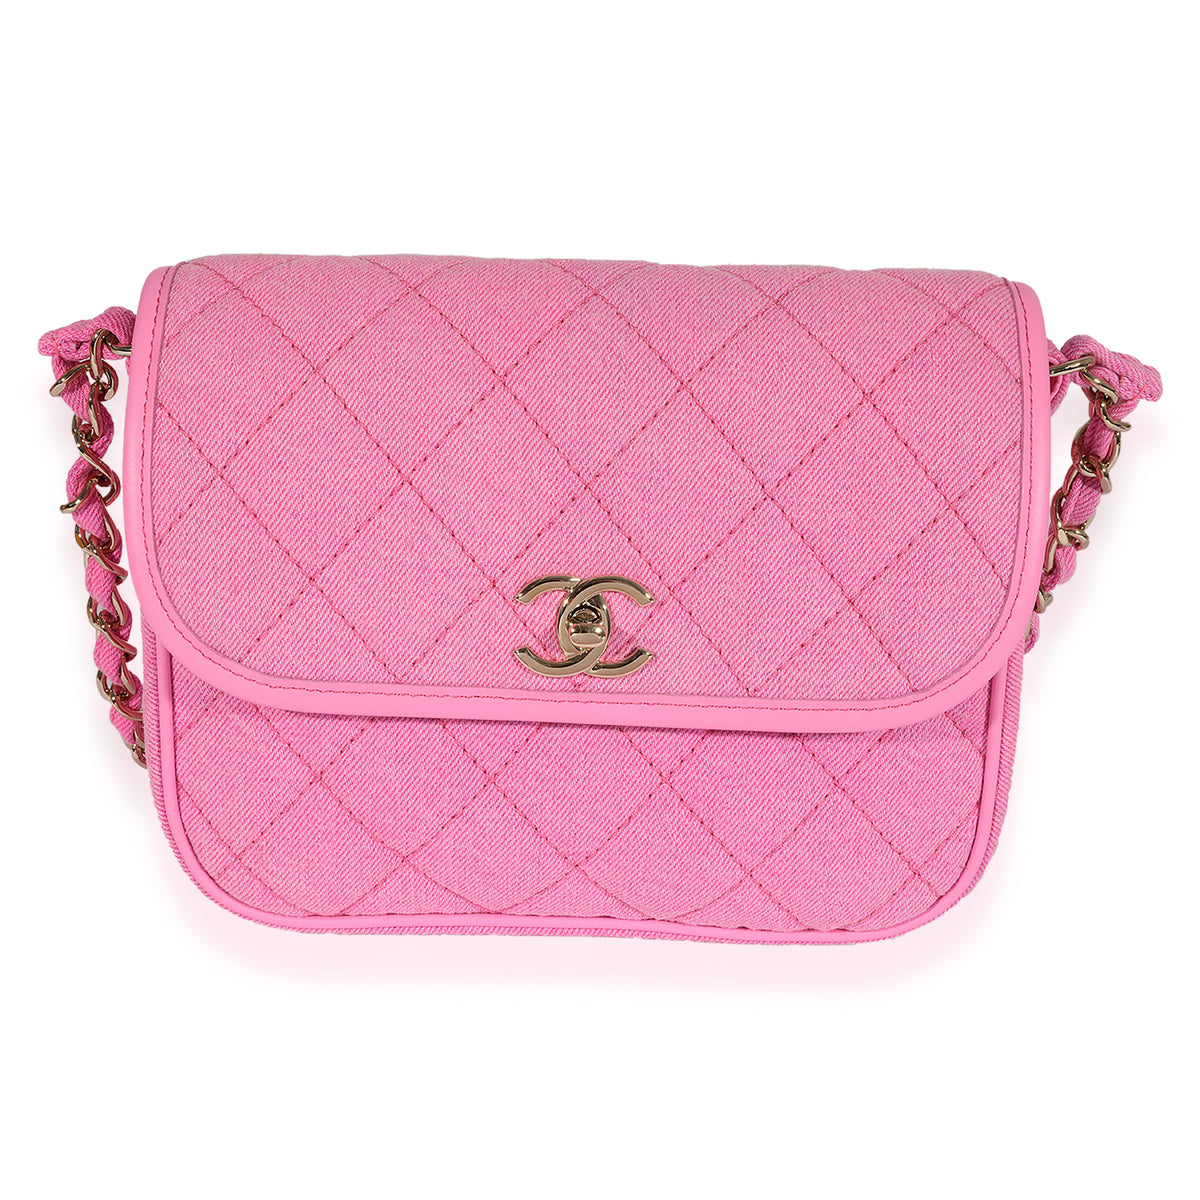 Chanel Pink Quilted Lambskin Leather Mini Square Classic Flap Bag Chanel